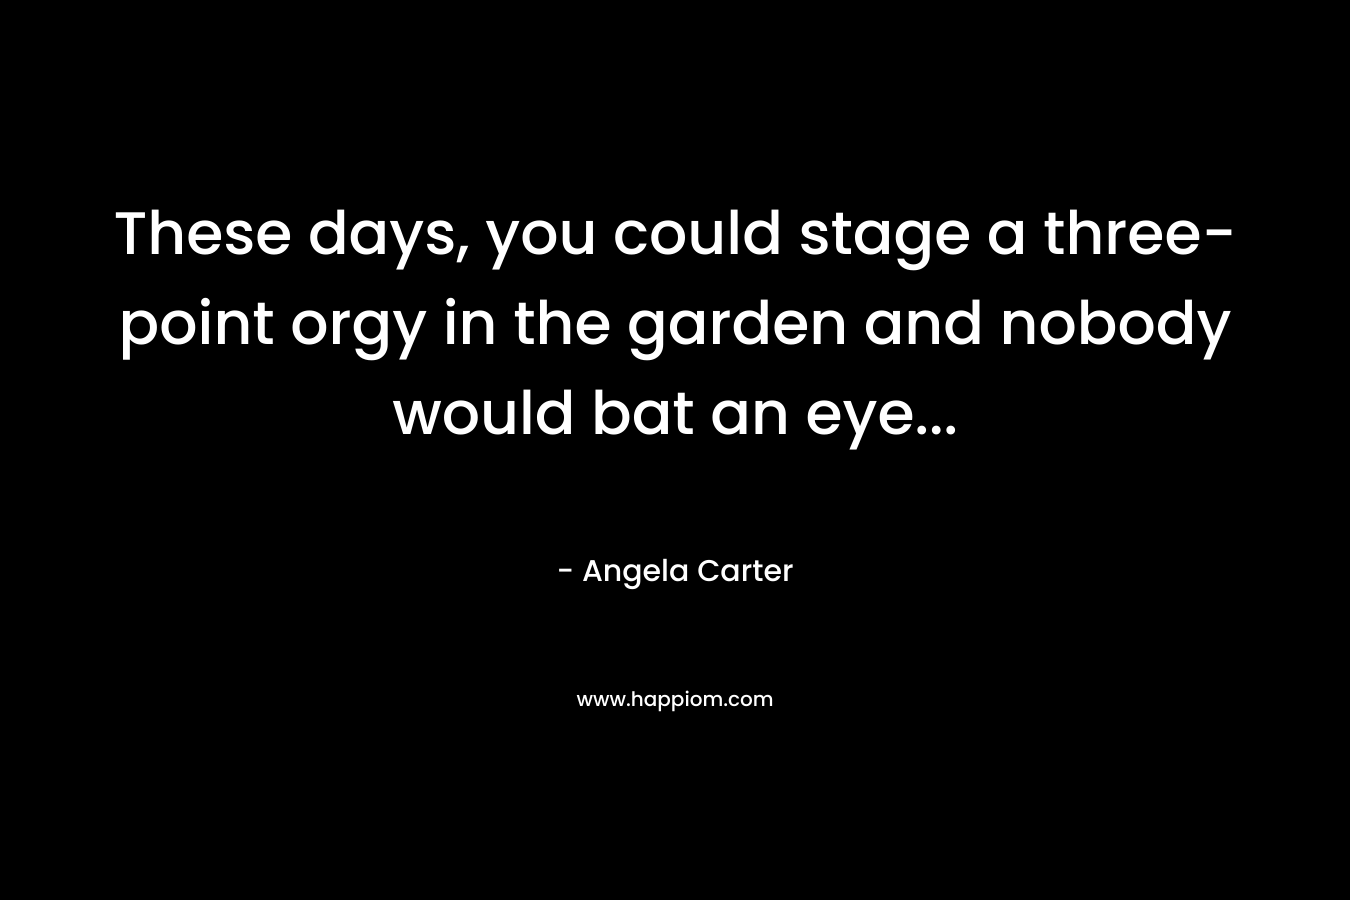 These days, you could stage a three-point orgy in the garden and nobody would bat an eye… – Angela Carter